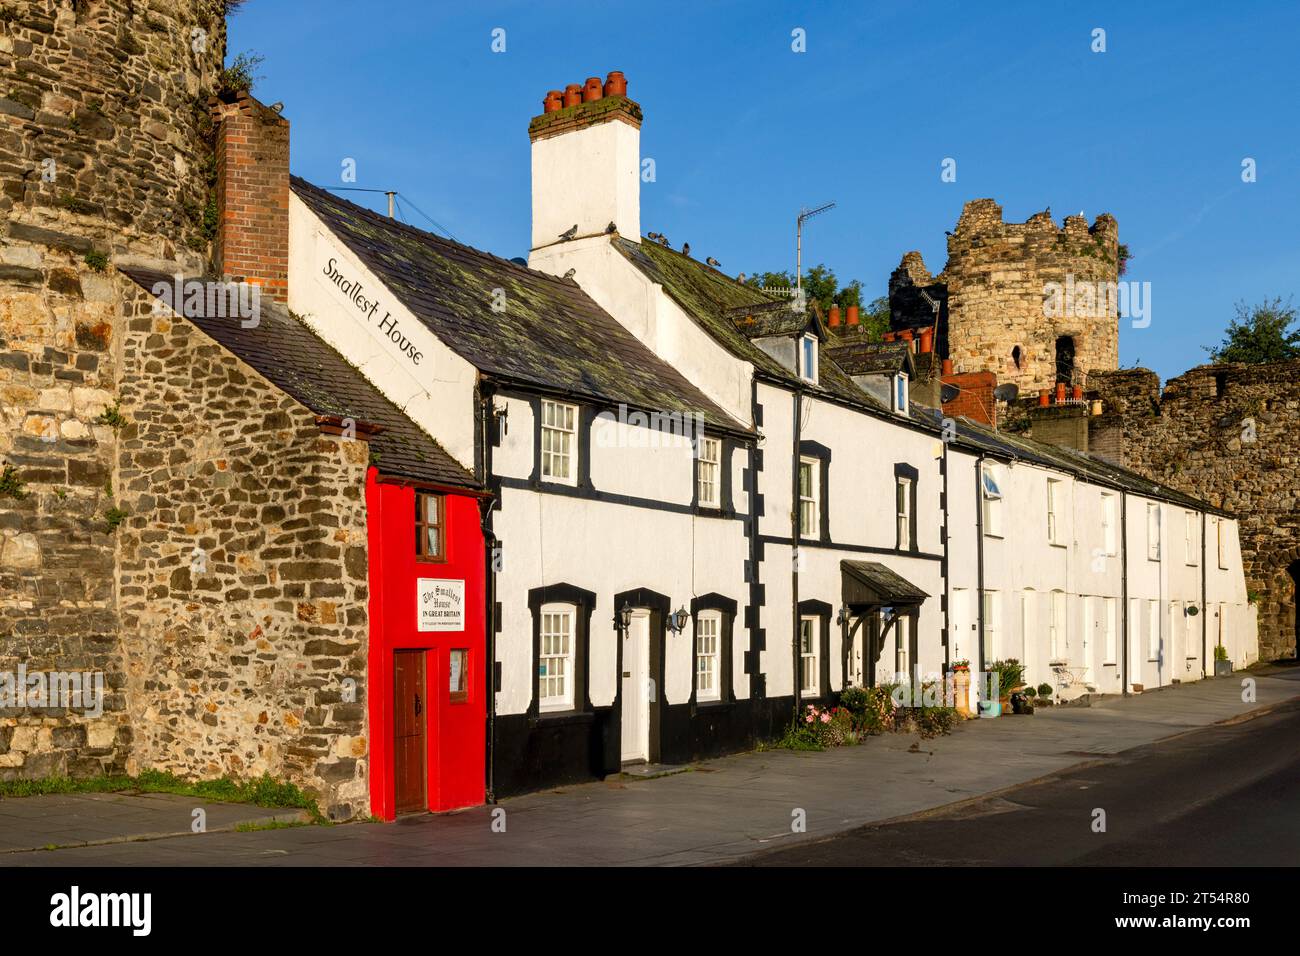 Conwy is a historic town in North Wales with a medieval castle and the smallest house in Great Britain. Stock Photo